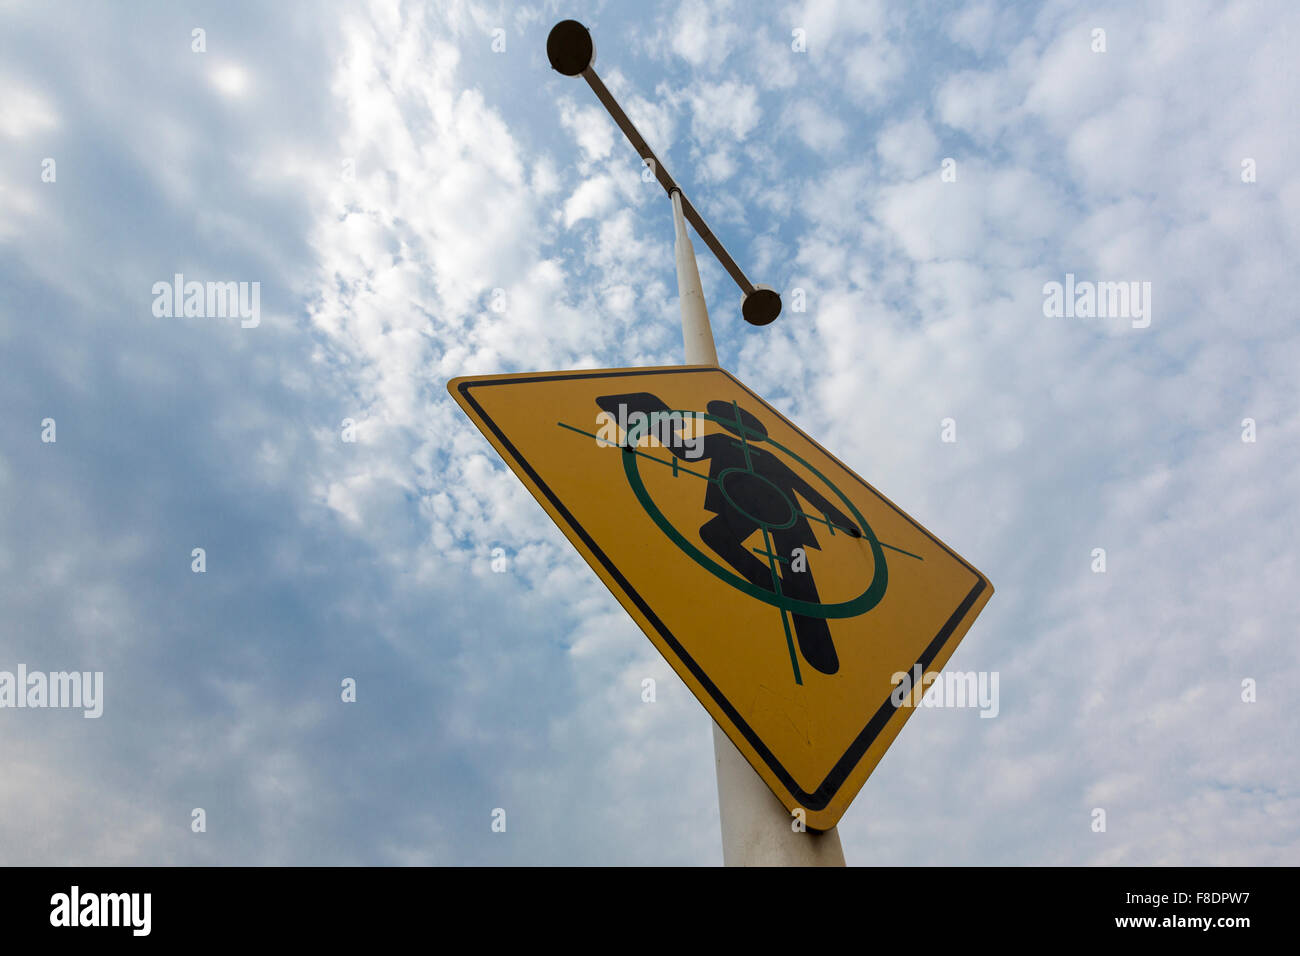 Yellow sign of target with Child and cloudy sky, Memory Park Stock Photo